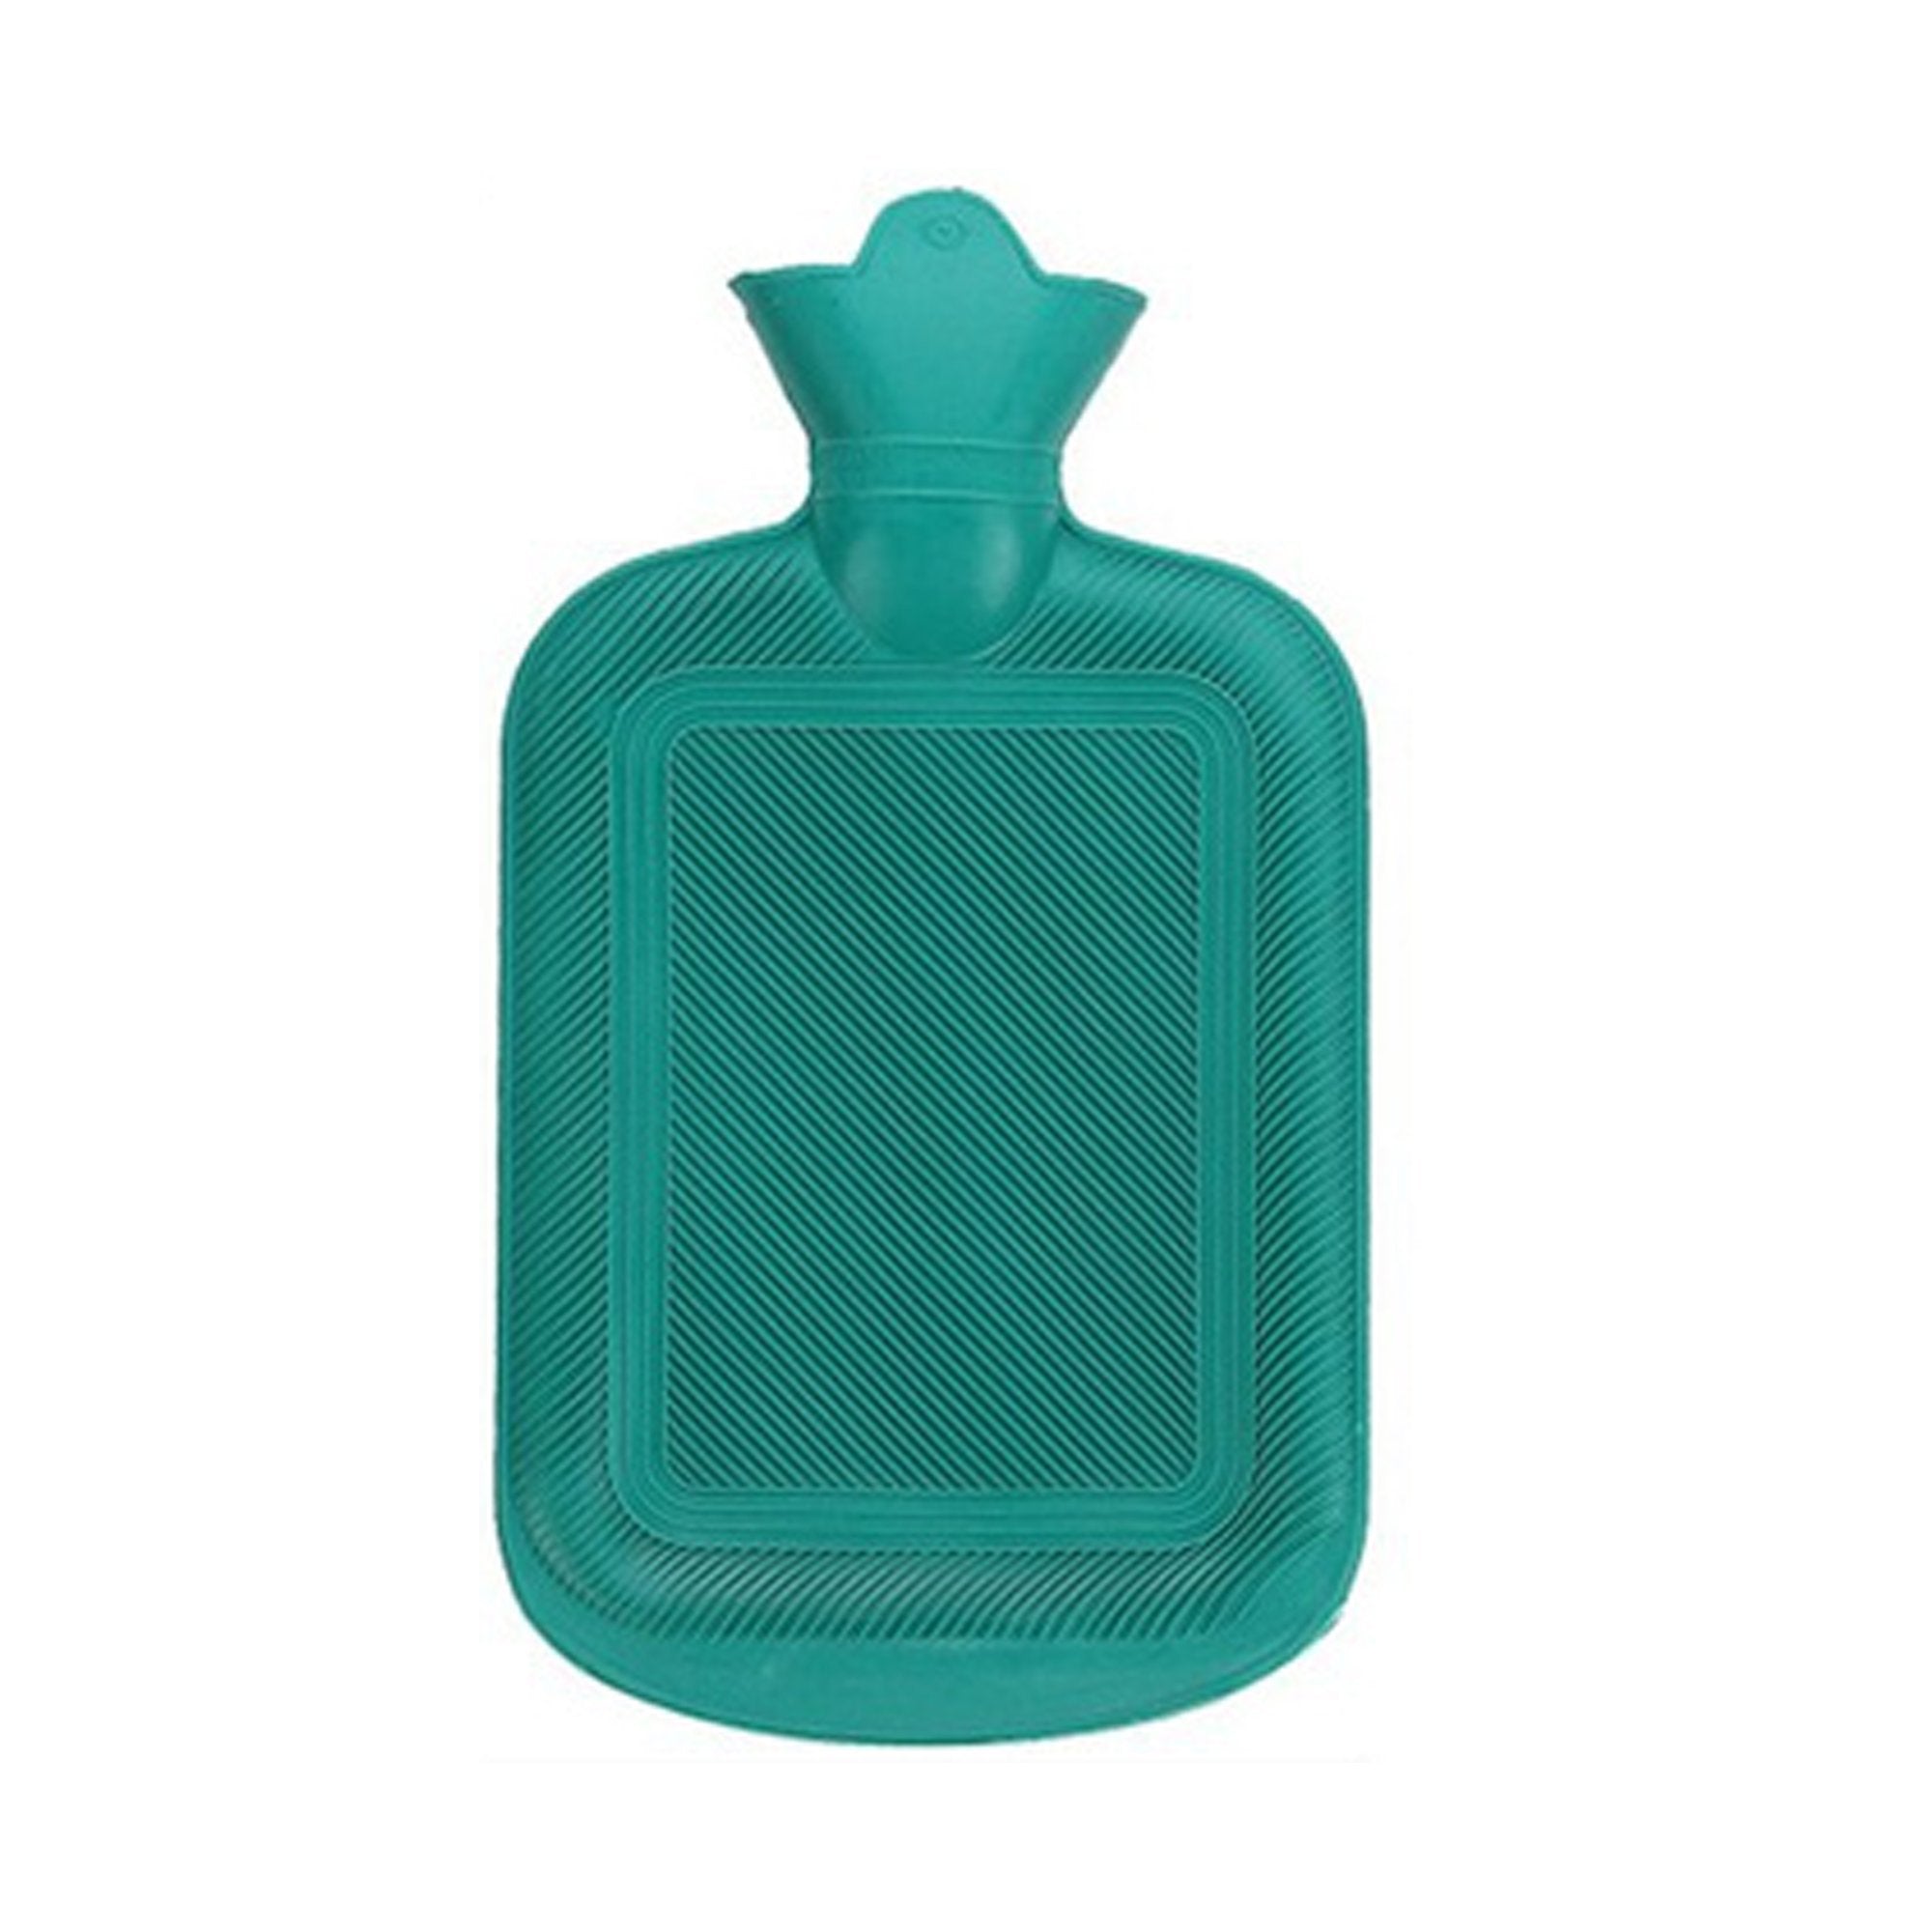 1489 Hot Water Bag for Pain Relief - SkyShopy